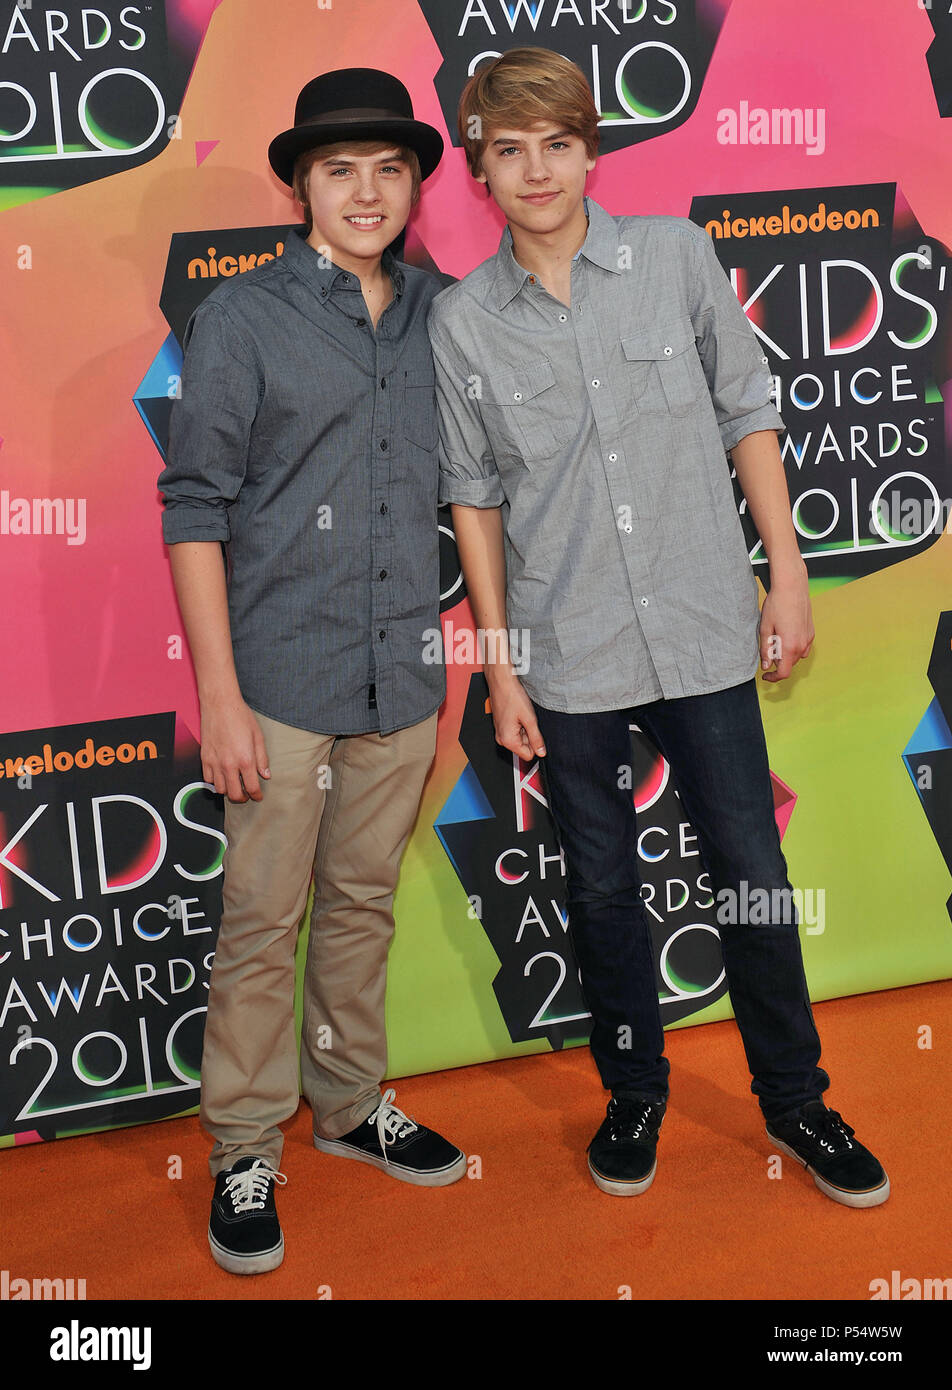 Cole Sprouse   Dylan Sprouse  43   - 23th  Annual Kids Choice Awards at The UCLA Pauley Pavillion In Los Angeles.Cole Sprouse   Dylan Sprouse  43  Event in Hollywood Life - California, Red Carpet Event, USA, Film Industry, Celebrities, Photography, Bestof, Arts Culture and Entertainment, Celebrities fashion, Best of, Hollywood Life, Event in Hollywood Life - California, Red Carpet and backstage, Music celebrities, Topix, Couple, family ( husband and wife ) and kids- Children, brothers and sisters inquiry tsuni@Gamma-USA.com, Credit Tsuni / USA, 2010 Stock Photo